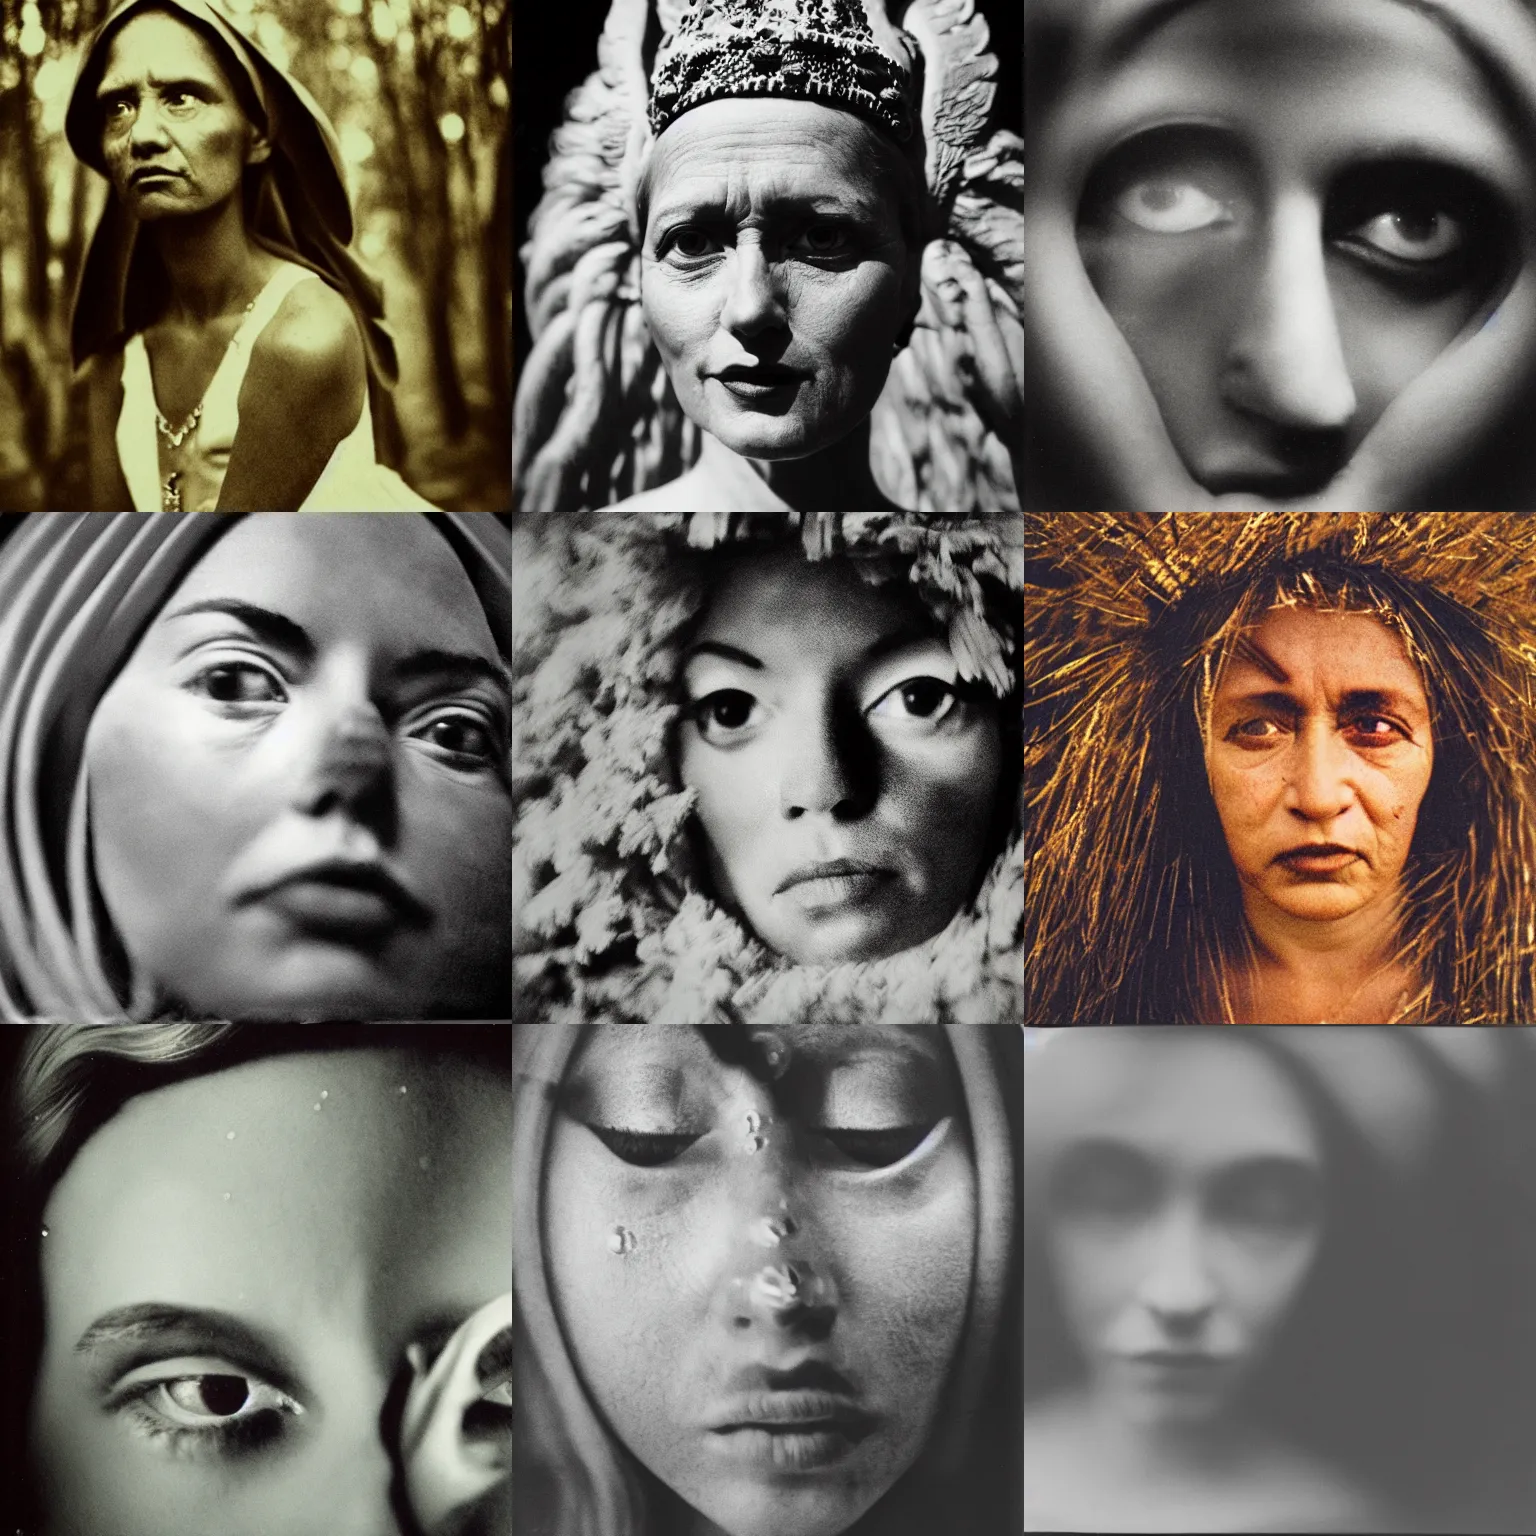 Prompt: close up portrait of klotho the goddess of fate, by trent parke, film development artifacts overlay